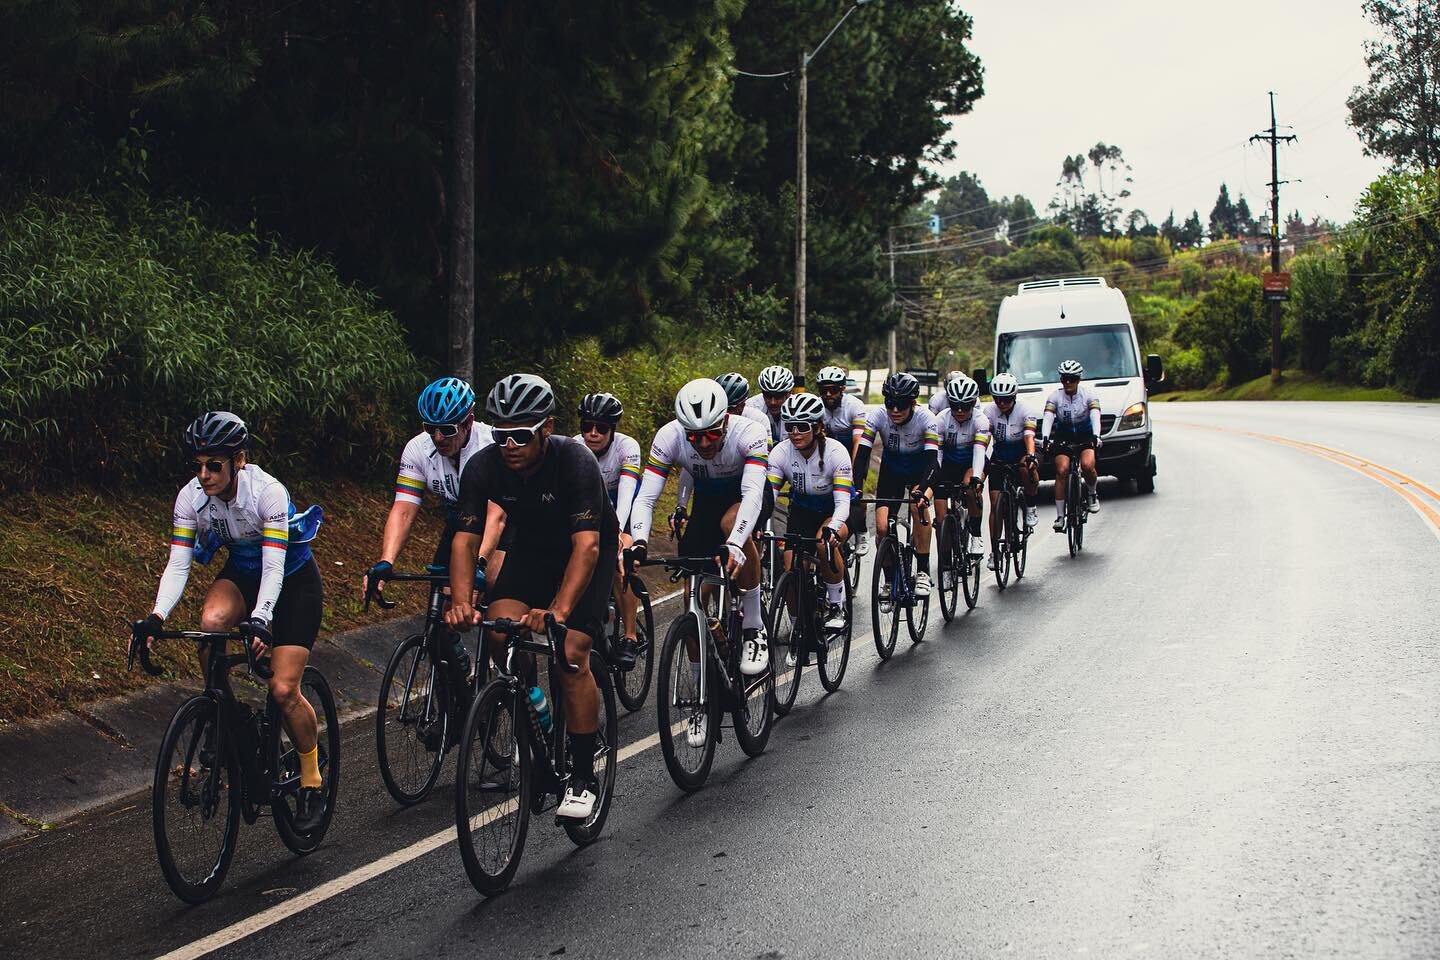 3R Cycling Experience rolling out under the escort of Movich ride leader Julian &amp; the Support Vehicle as they start the 3rd day of their camp&hellip; headed towards Cocorna to enjoy a breathtaking view in the clouds. 

@3r.cycling.experience 
@mo